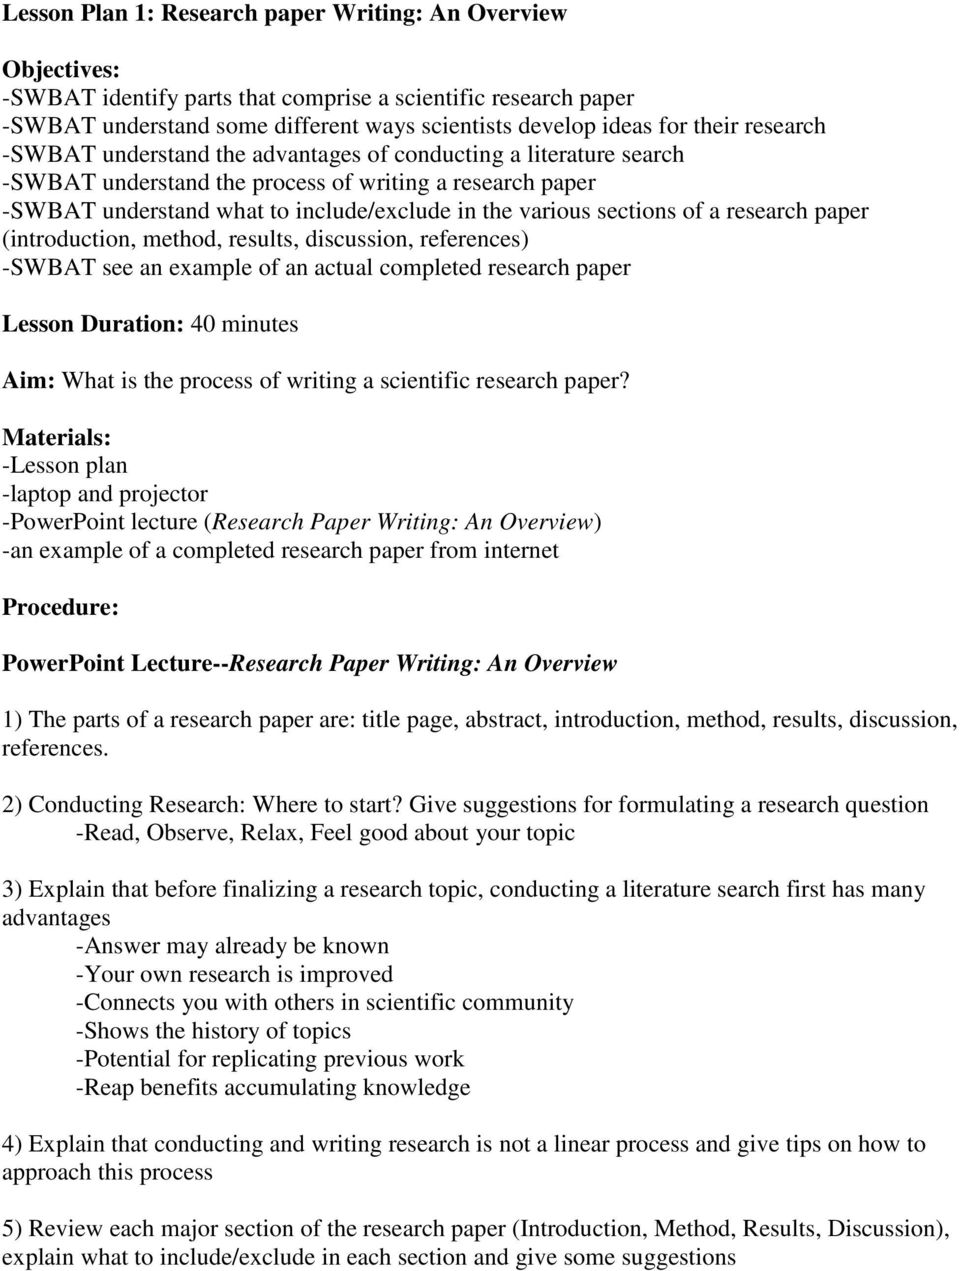 Lesson Plan 28: Research paper Writing: An Overview - PDF Free Download